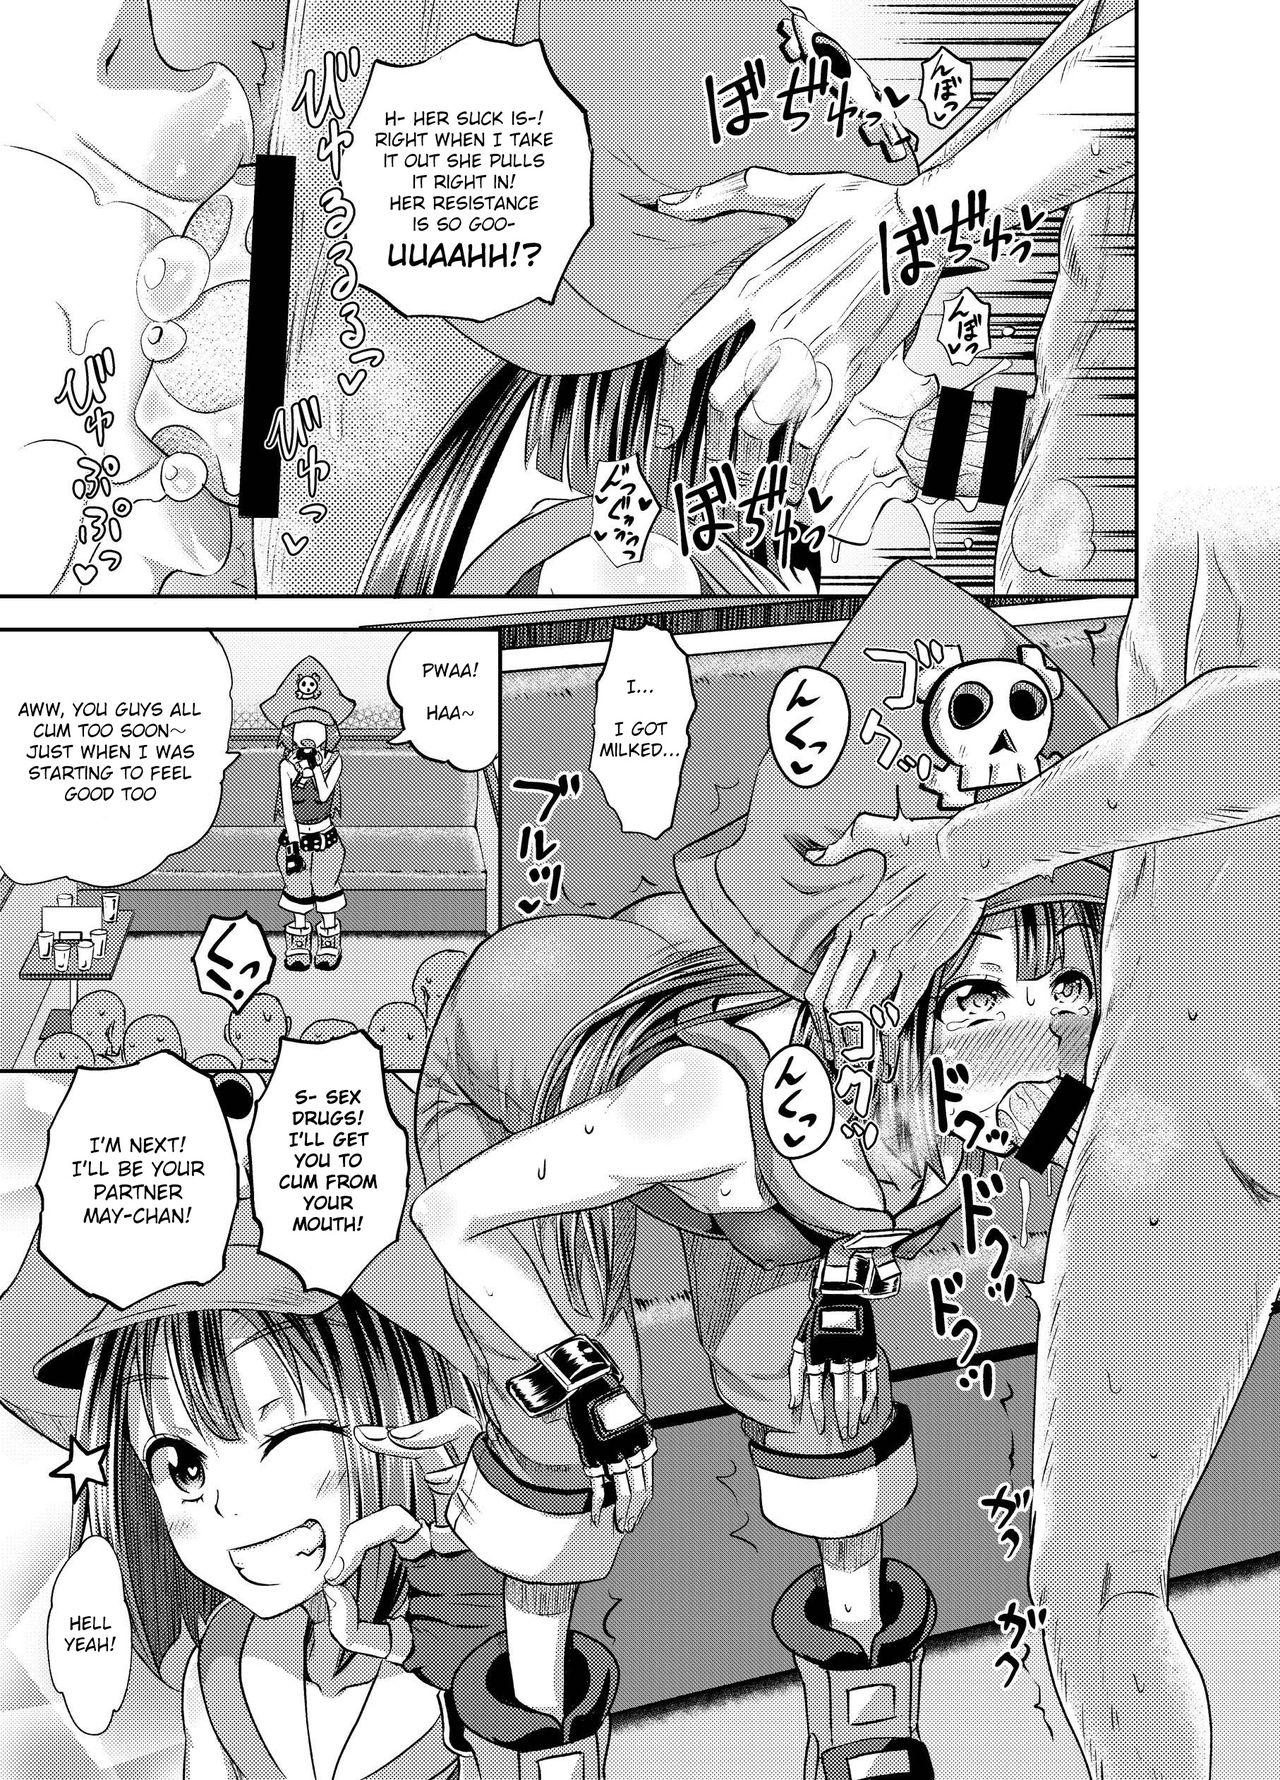 Oil Jellyfish Kaizokudan e Youkoso! | Welcome to The Jellyfish Pleasure Club! - Guilty gear Blow Job Movies - Page 10